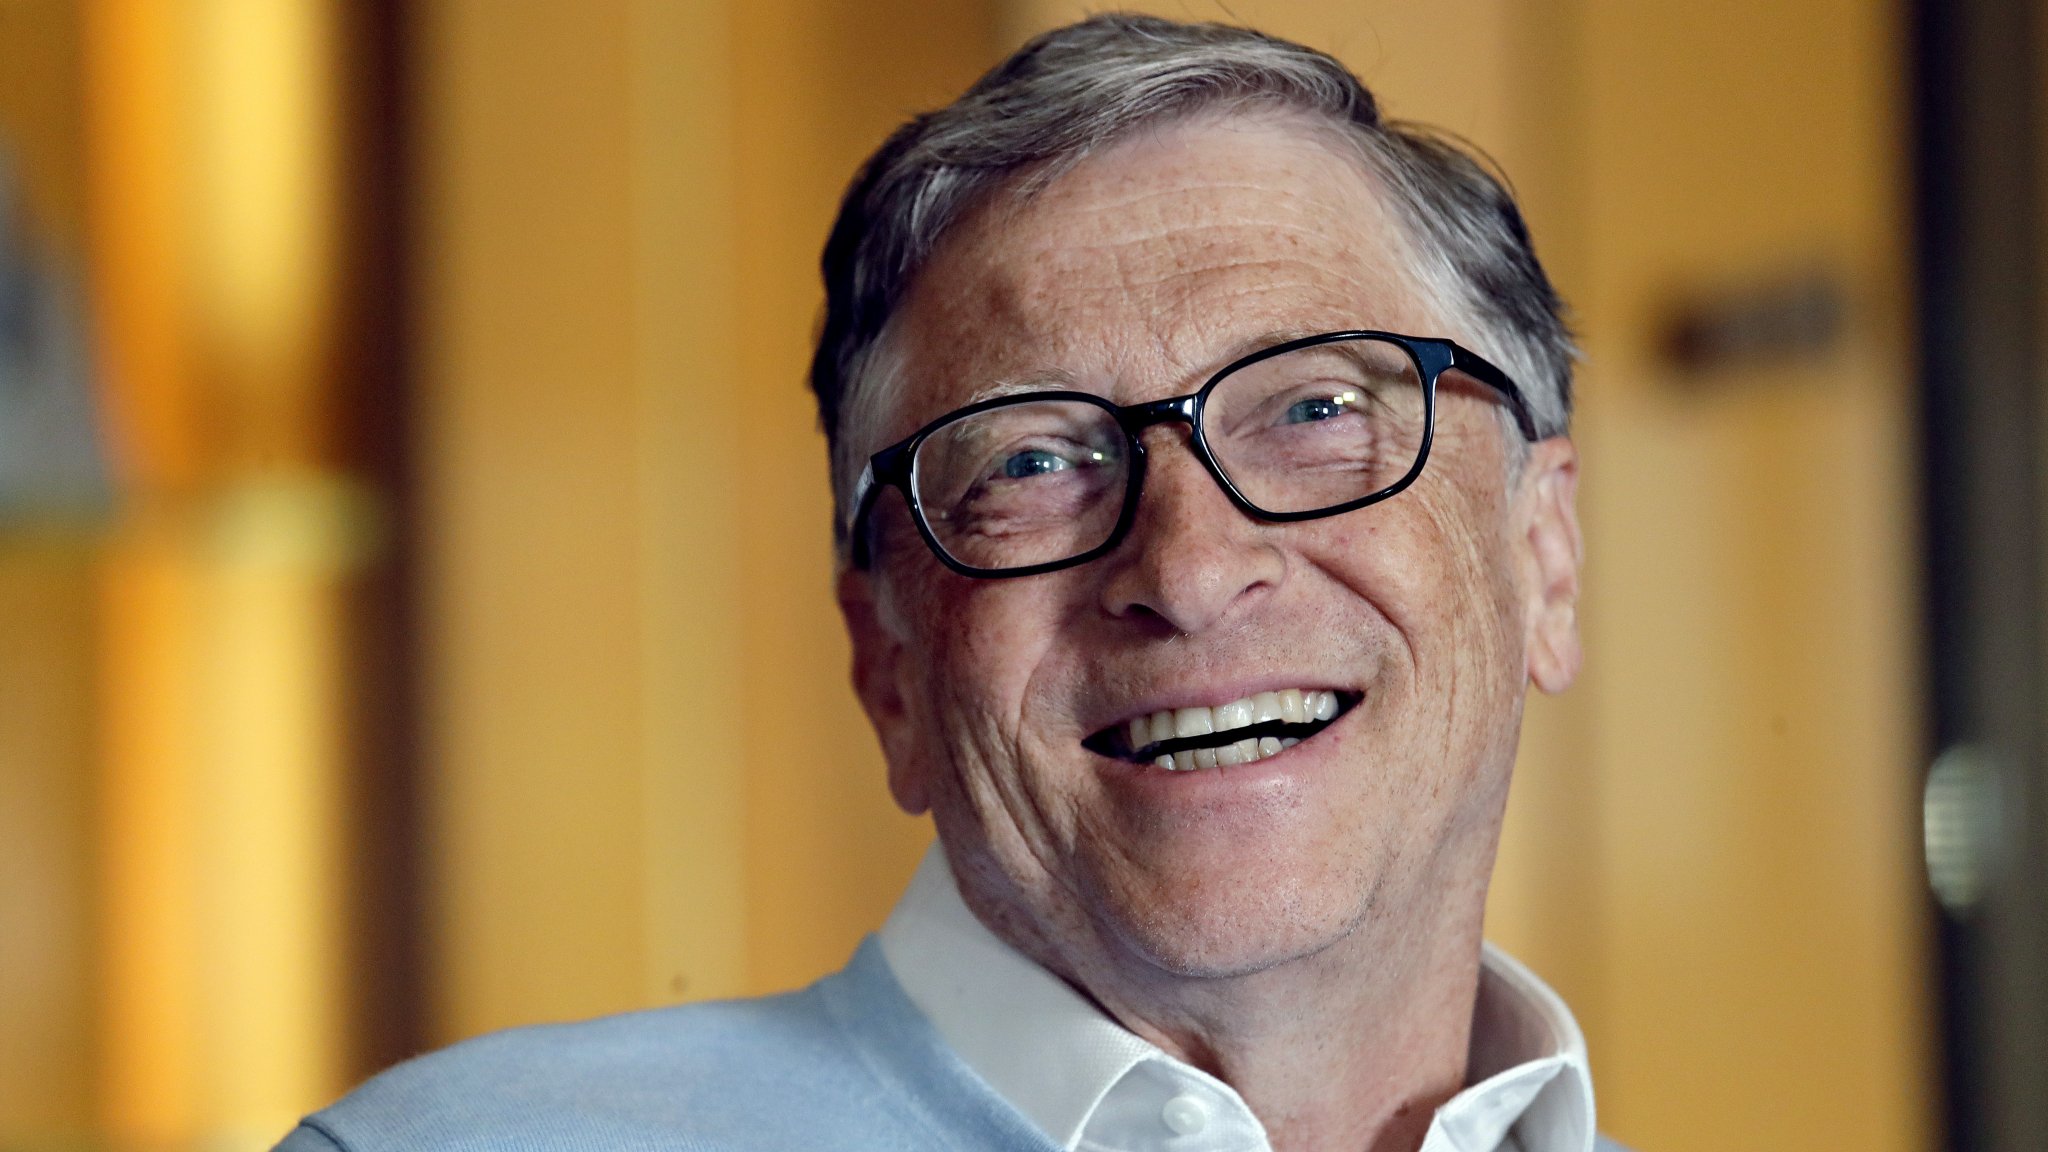 Microsoft Board Investigated Bill Gates' 'Intimate Relationship' With Employee